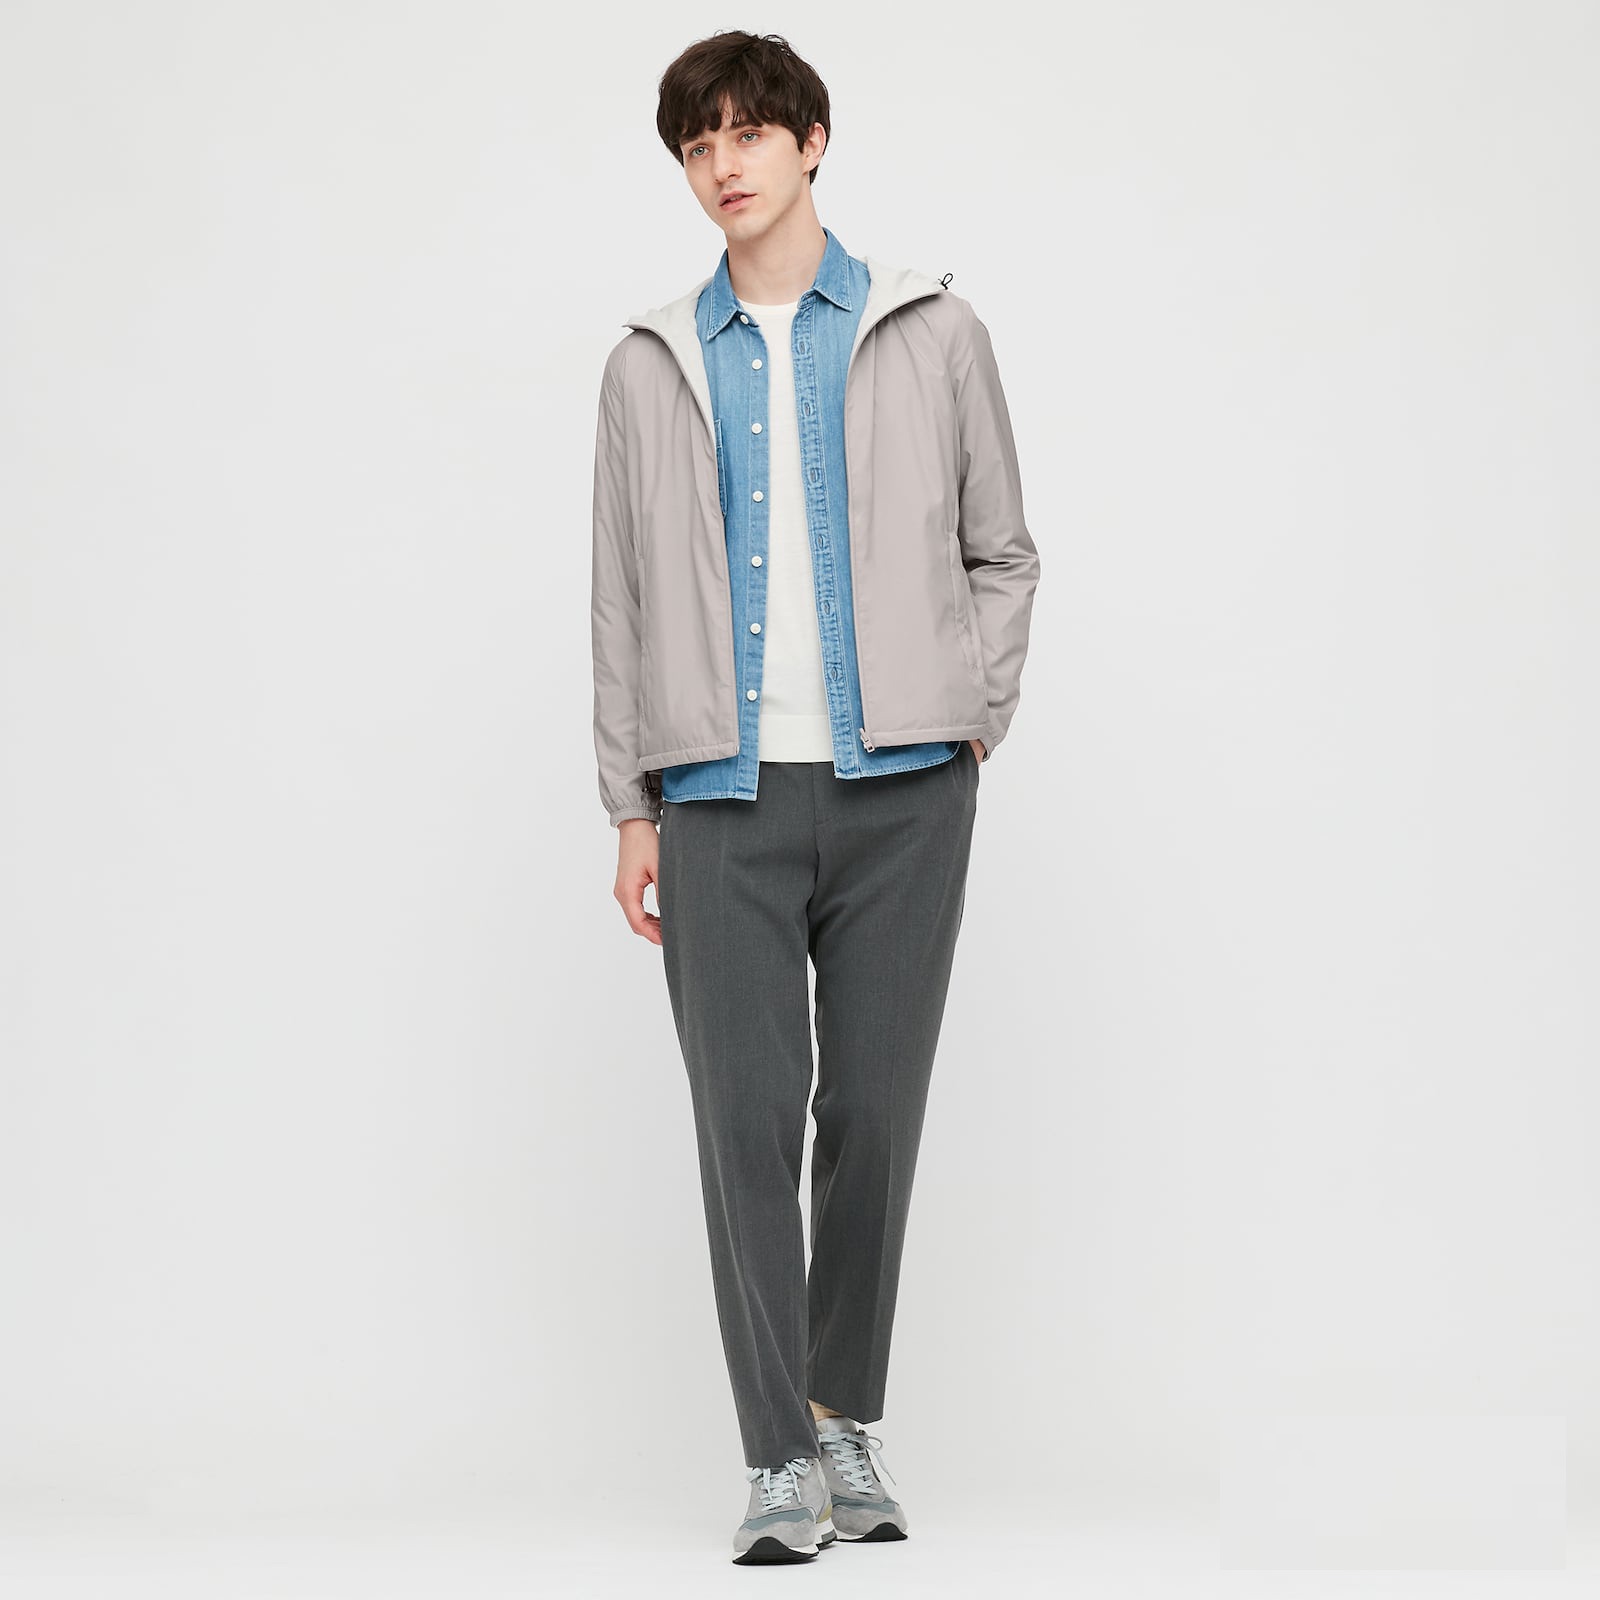 UNIQLO Outerwear Collection: Fit for Every Mood - KUMAGCOW.COM